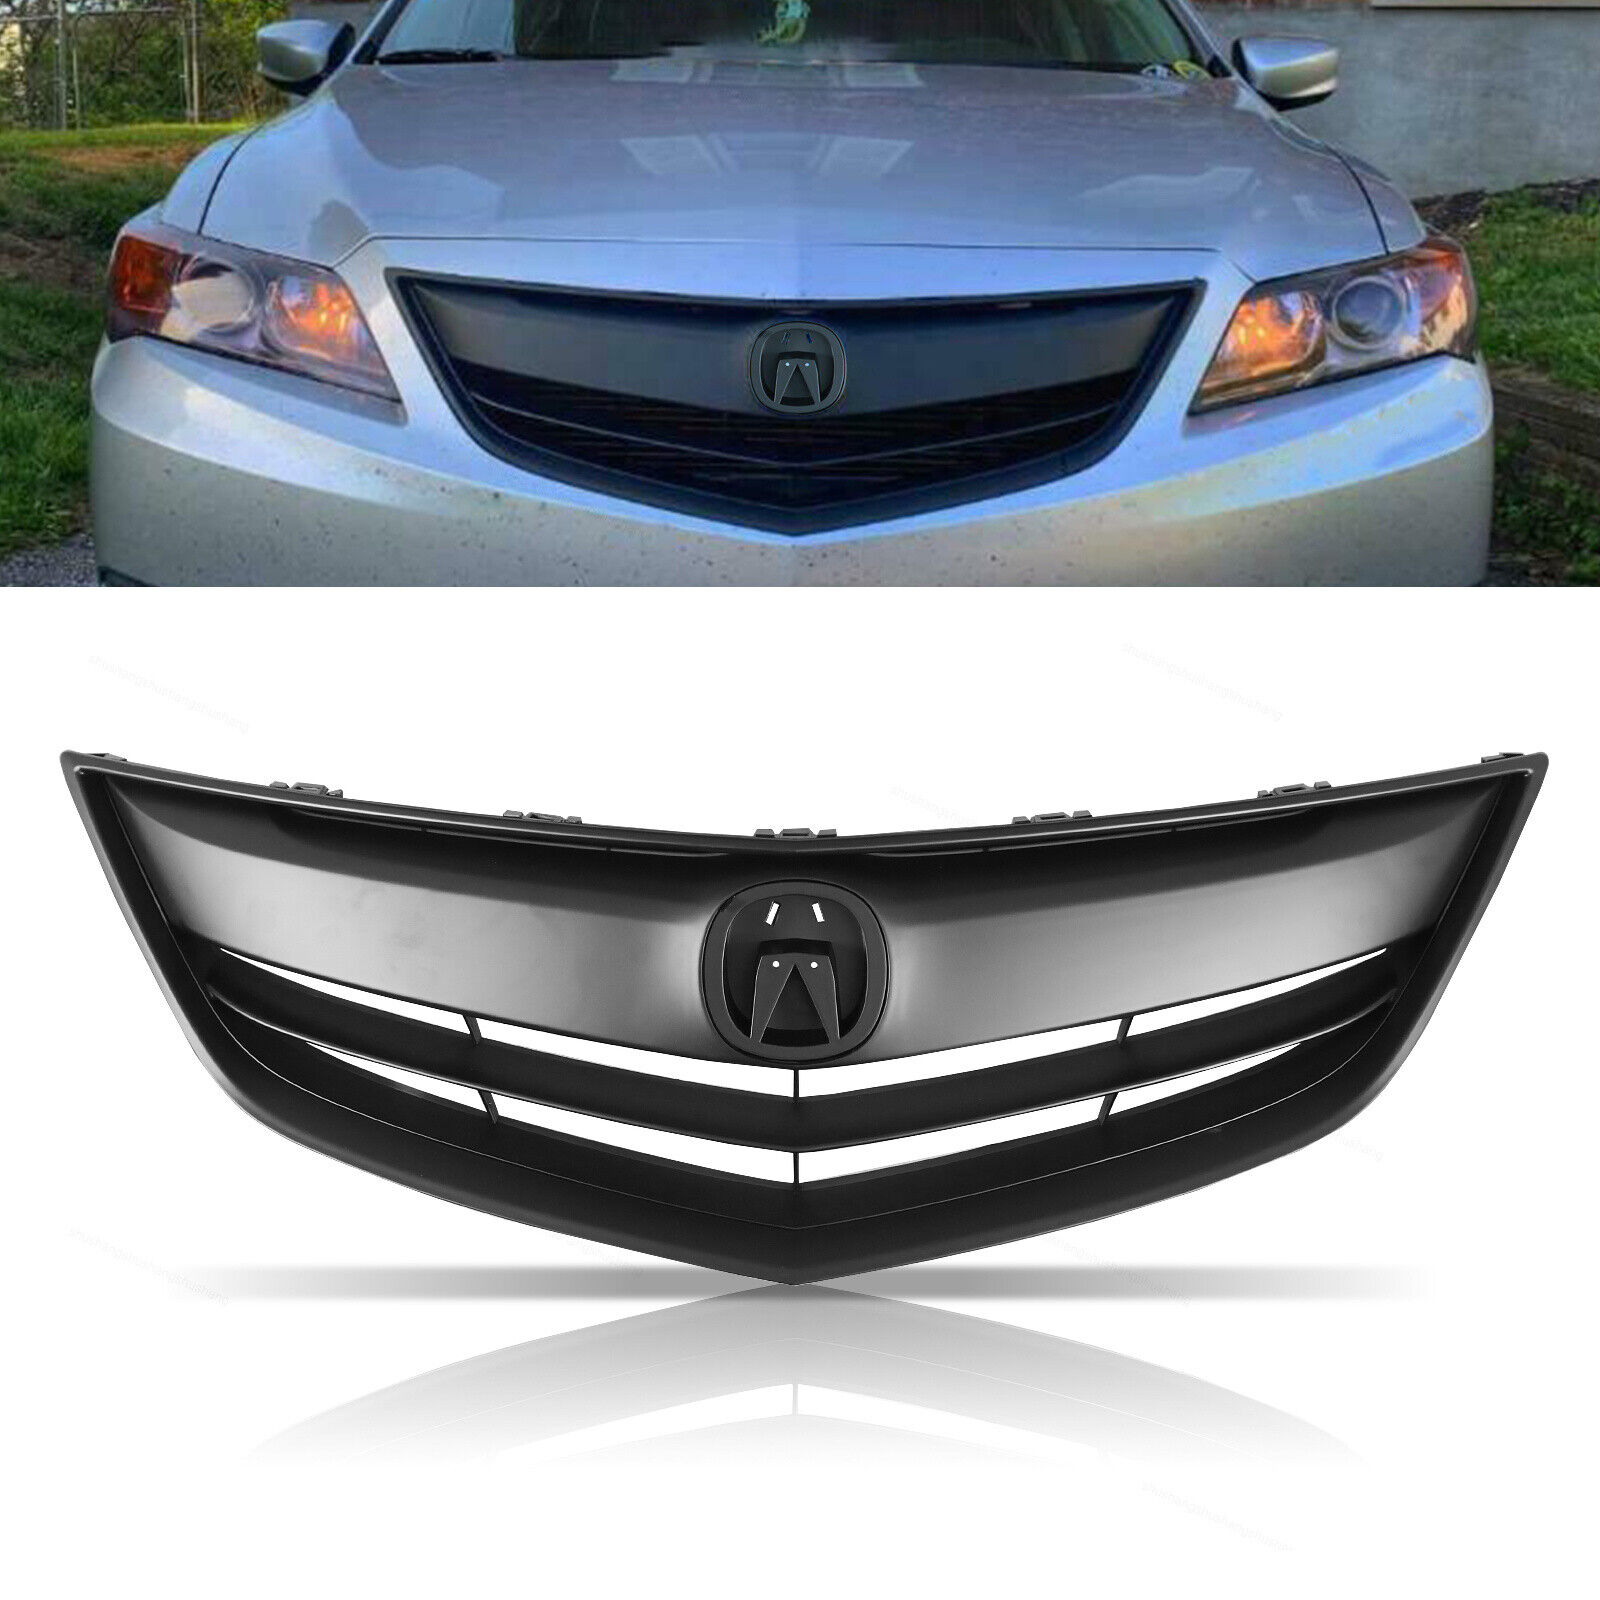 FIt 2013 2014 2015 Acura ILX All Matte BLACK Grille Grill Assembly Front Upper